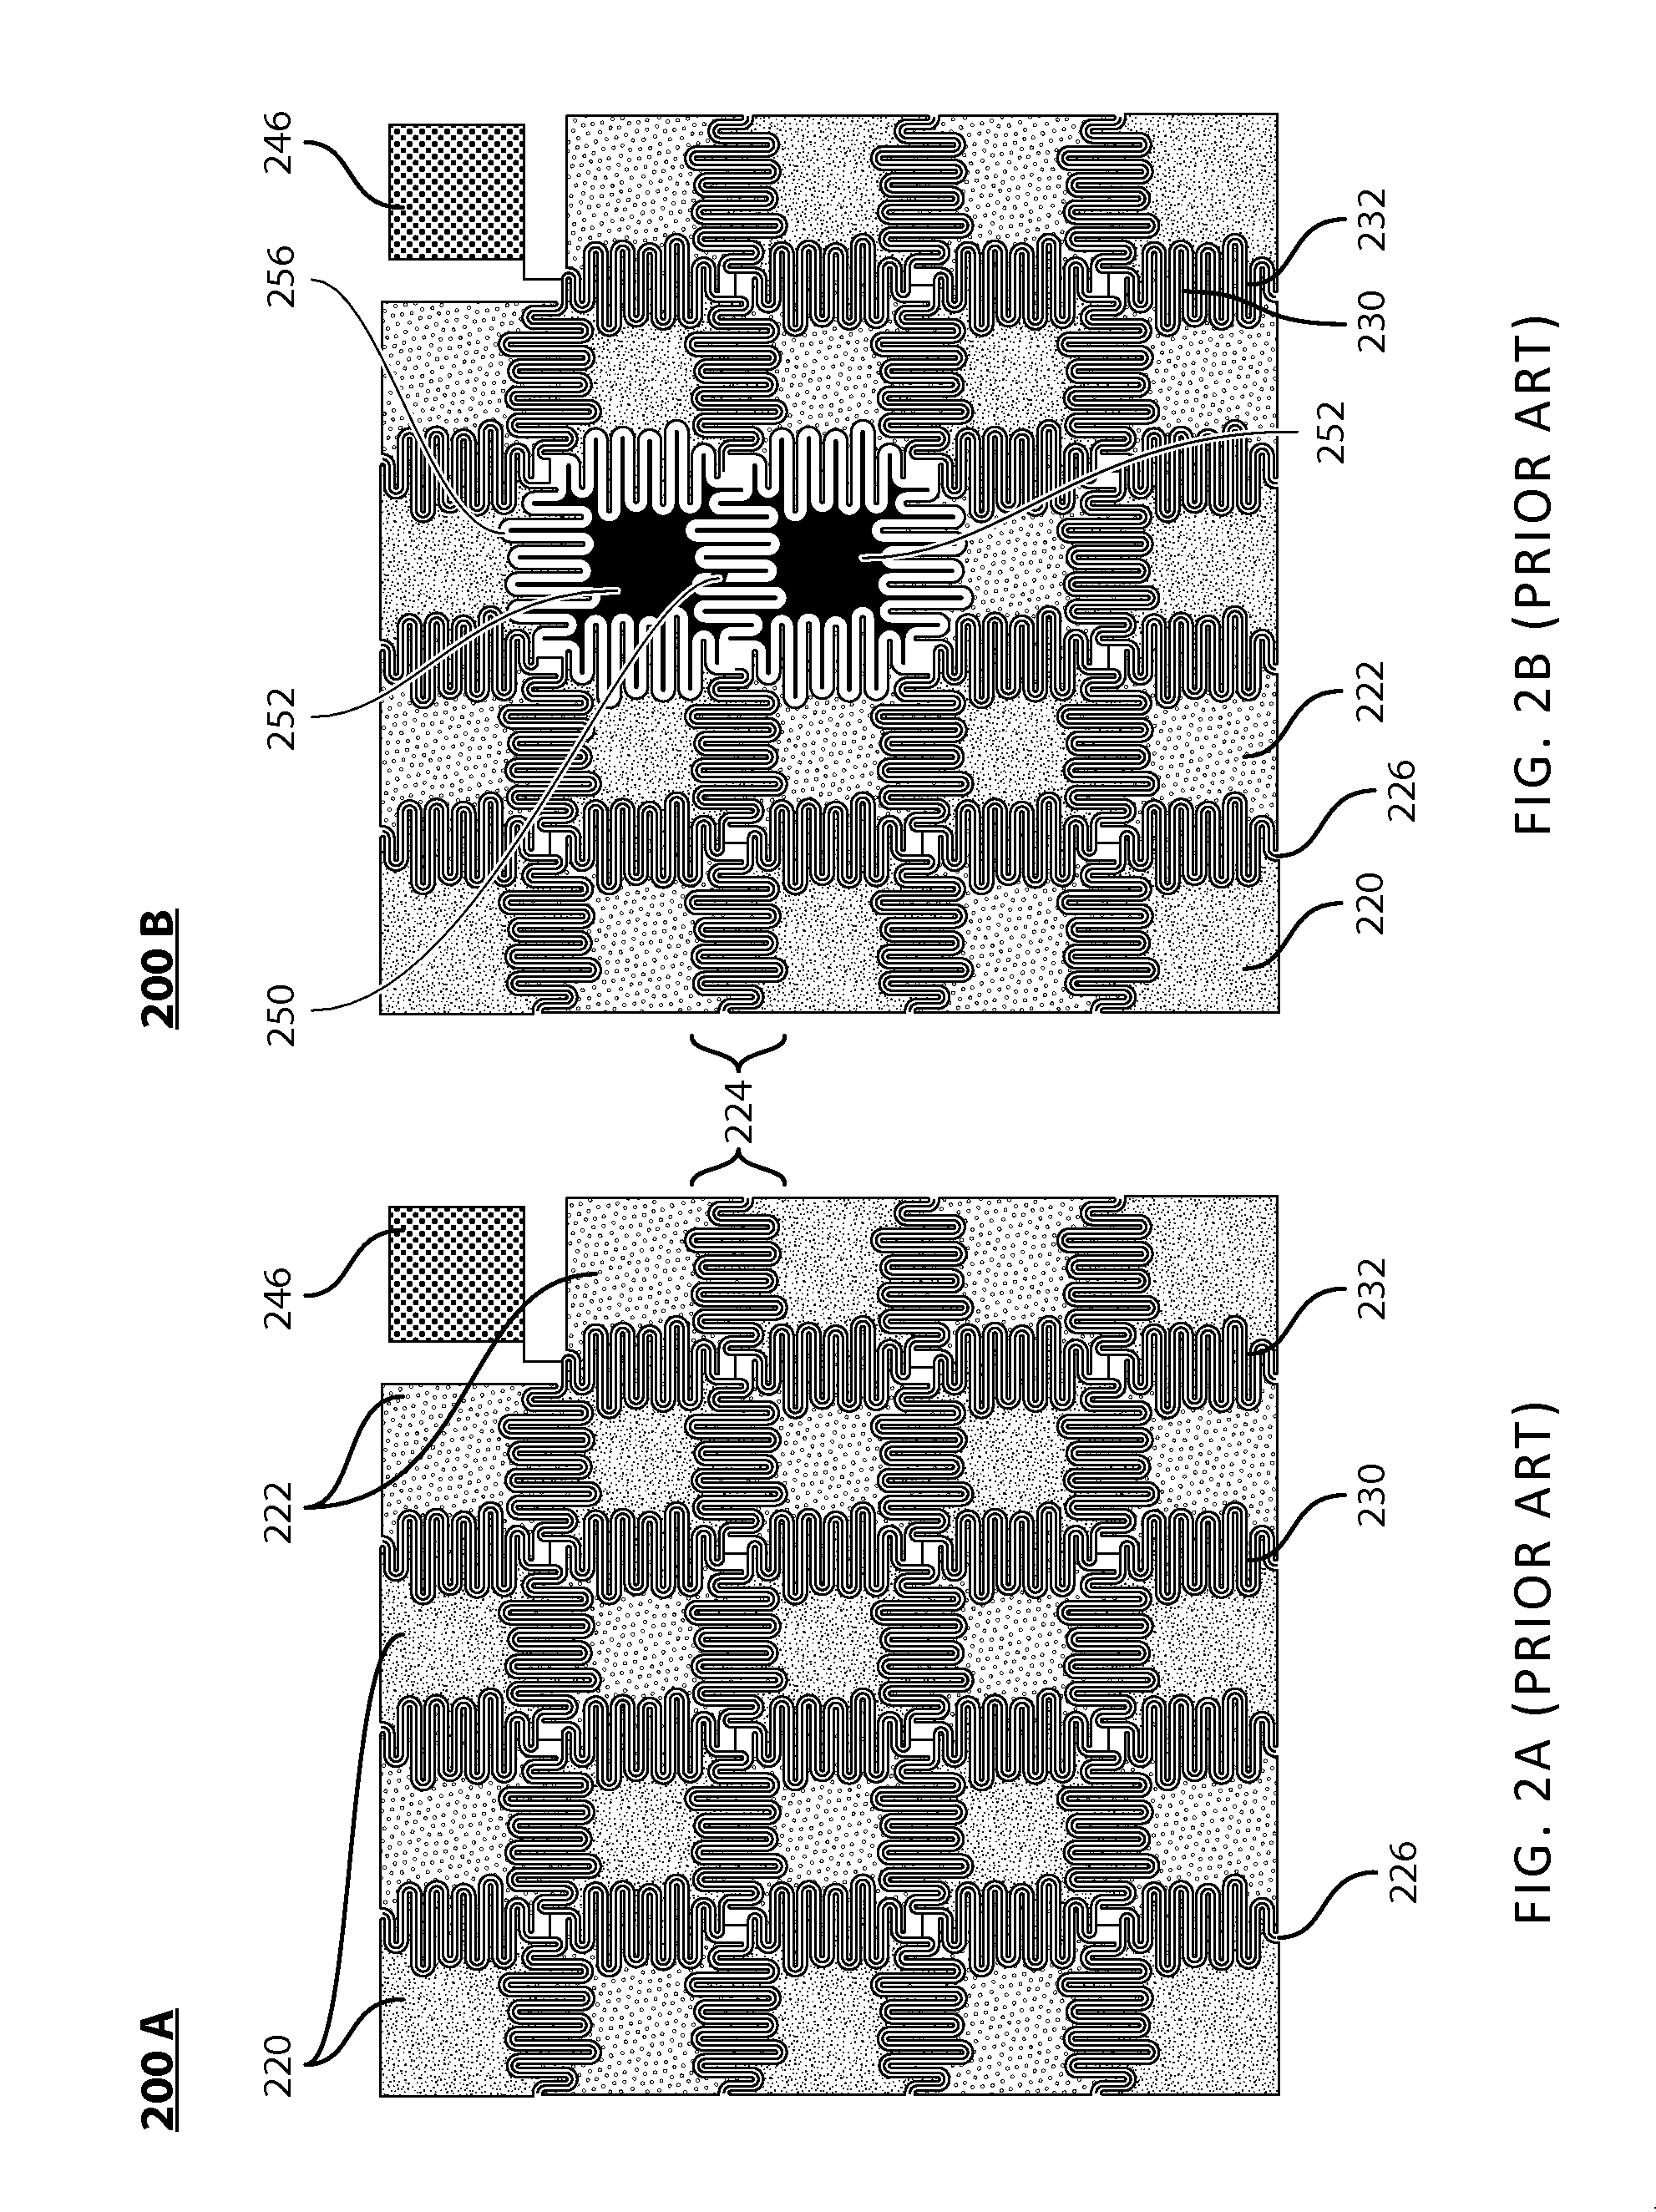 Fault tolerant design for large area nitride semiconductor devices